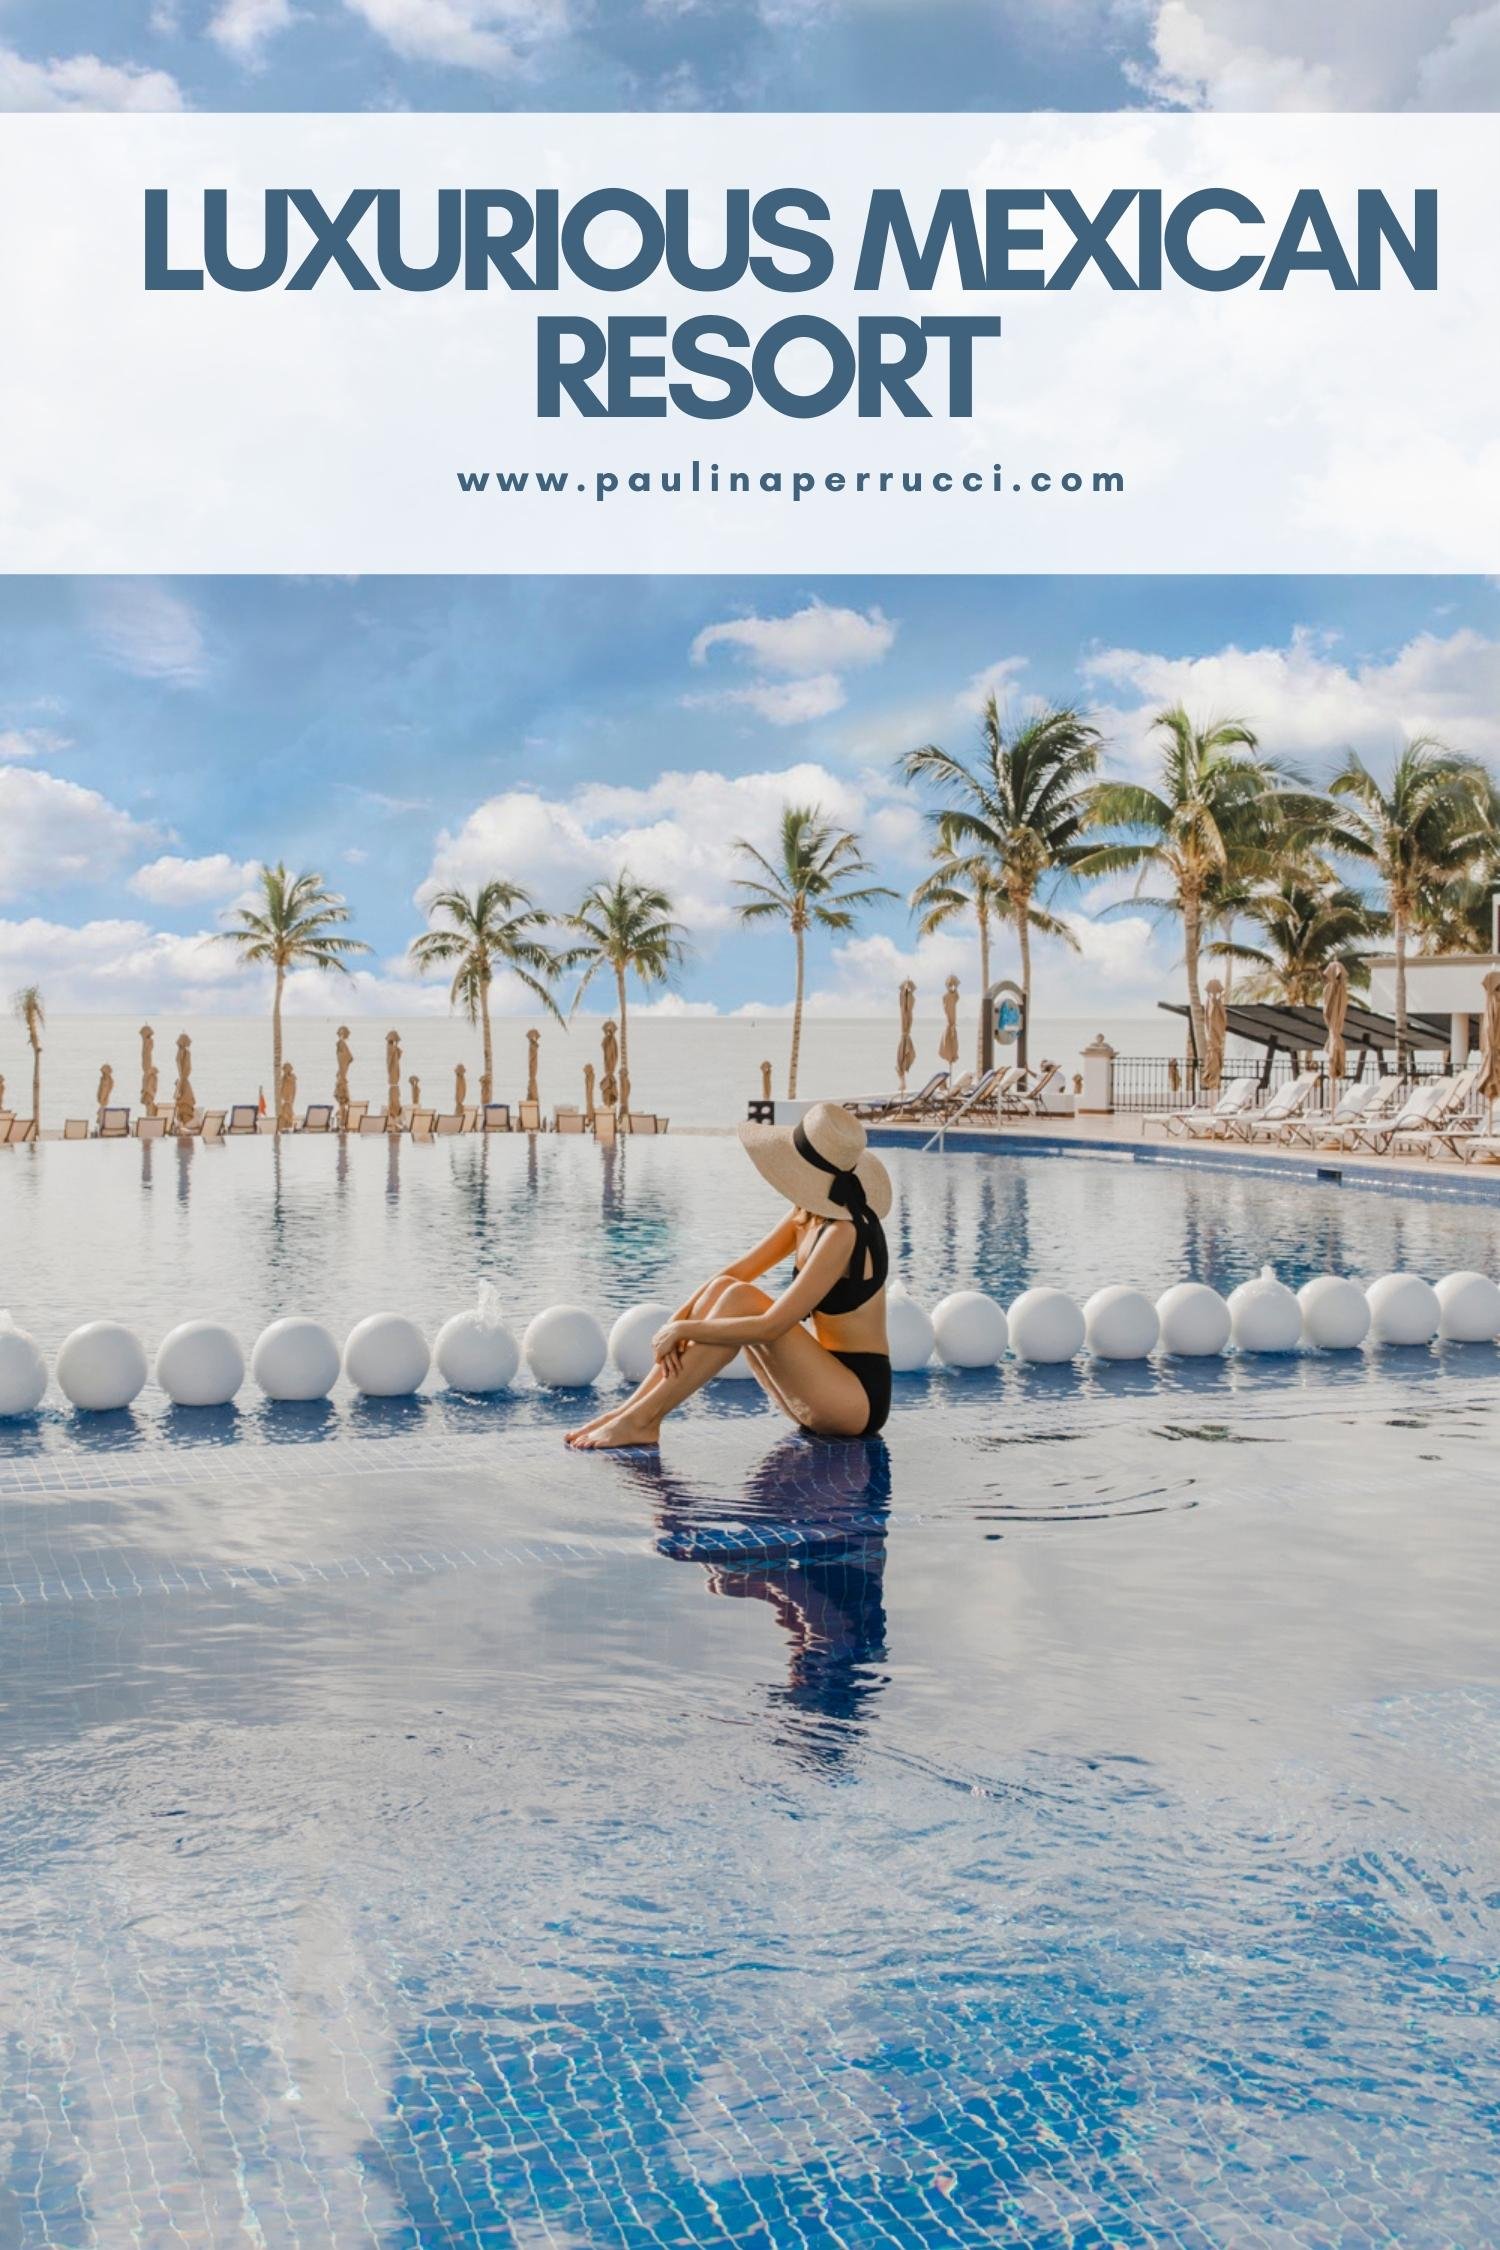 Travel Guide: The Grand Residences Riviera Cancun, a Leading Hotel of the World